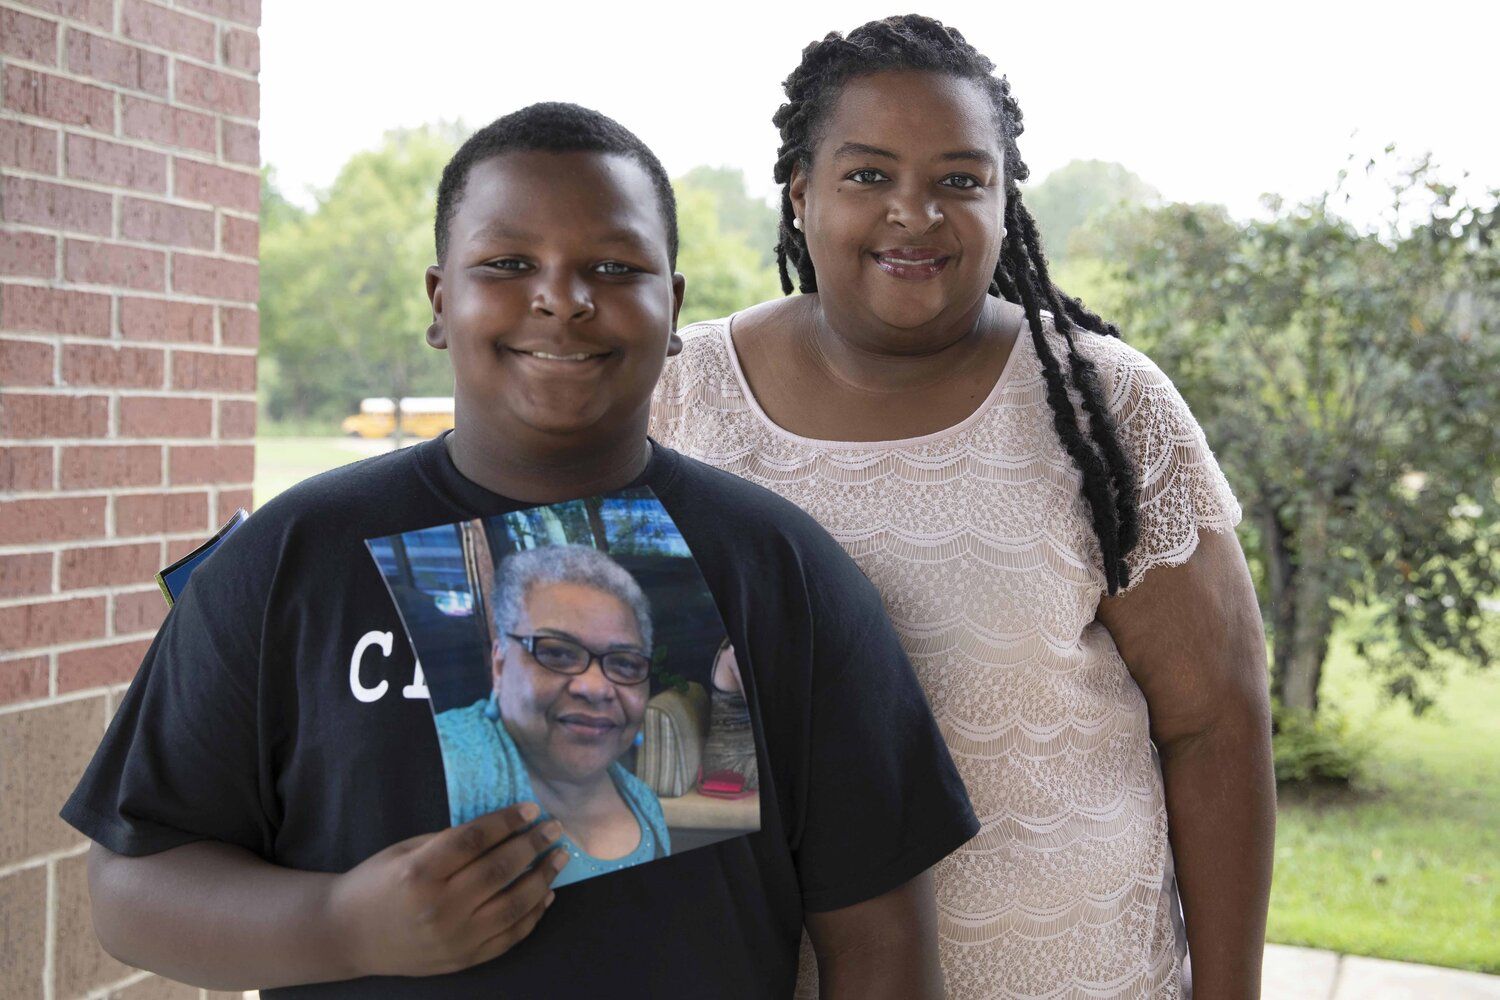 Karlton Jackson (left), age 10, holds a photo of his late grandmother, Carol Faye Doby, as he stands with his mother Shenika Jackson (right) on Friday, September 25, 2020 in Bolton, MS. Doby, of Stonewall, passed away from complications of COVID-19 earlier this year. Image by Sarah Warnock/MCIR. United States, 2020.
